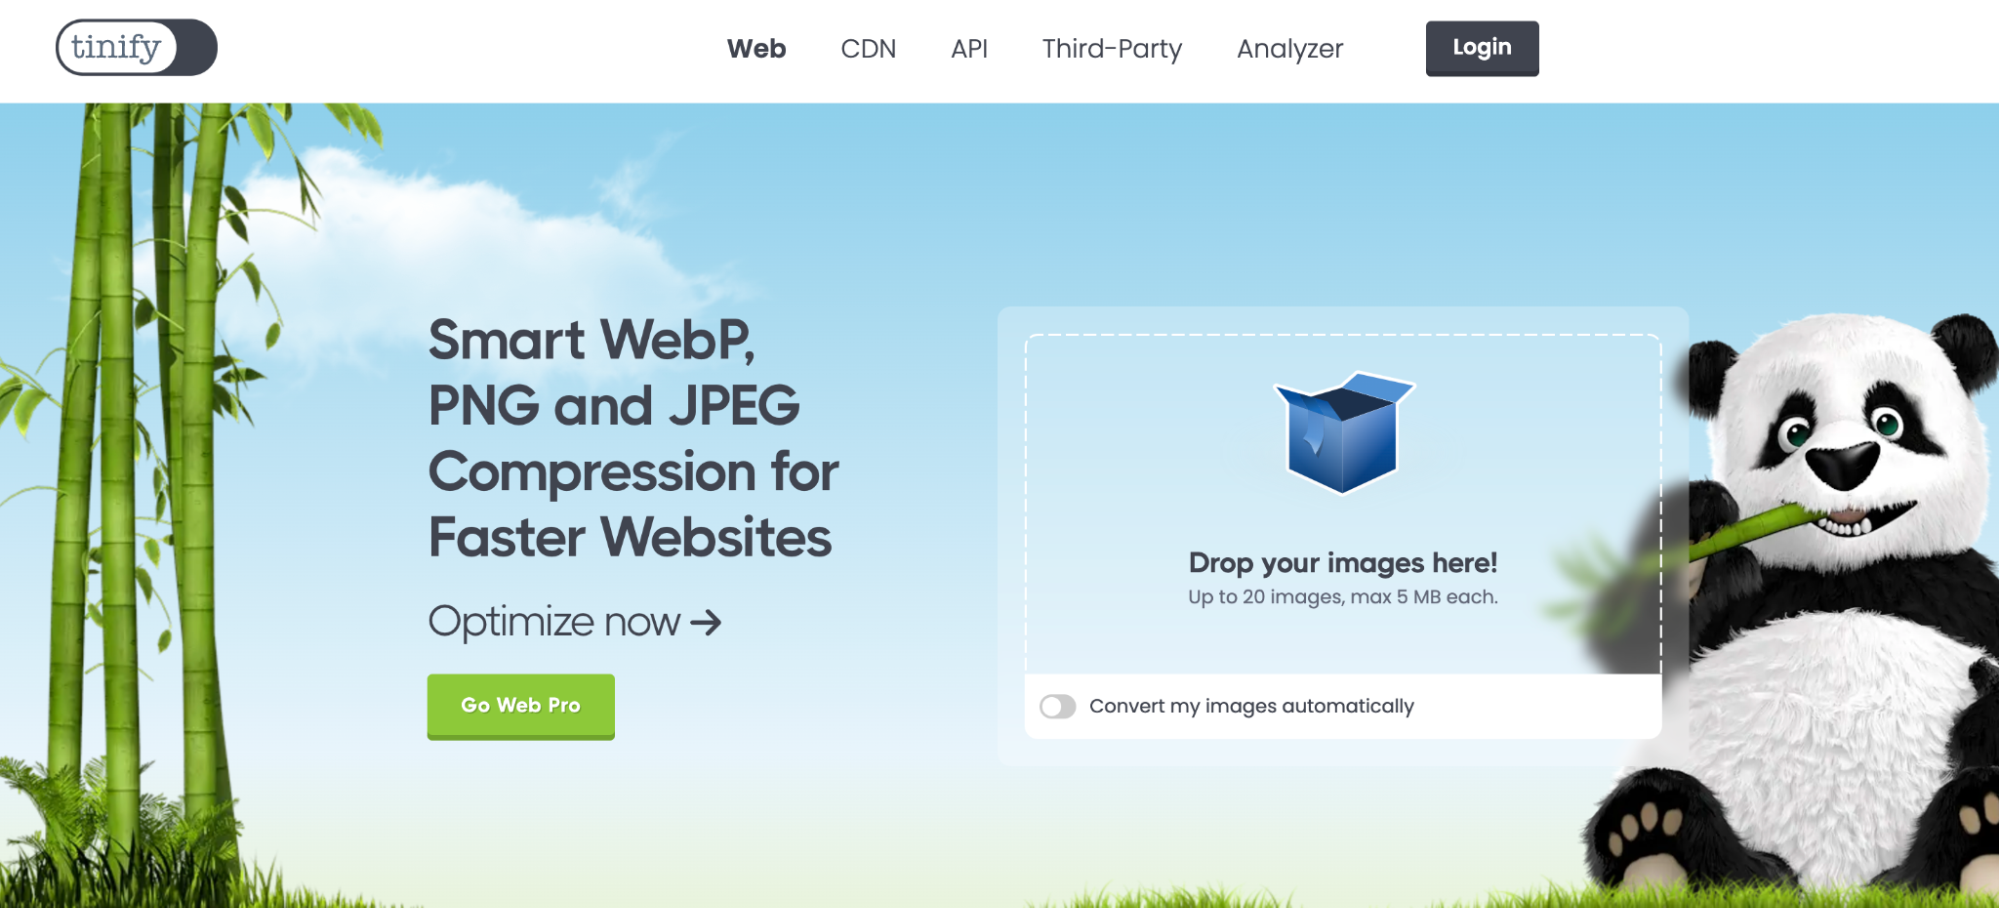 Image of TinyPNG’s homepage with option to drop images for conversion